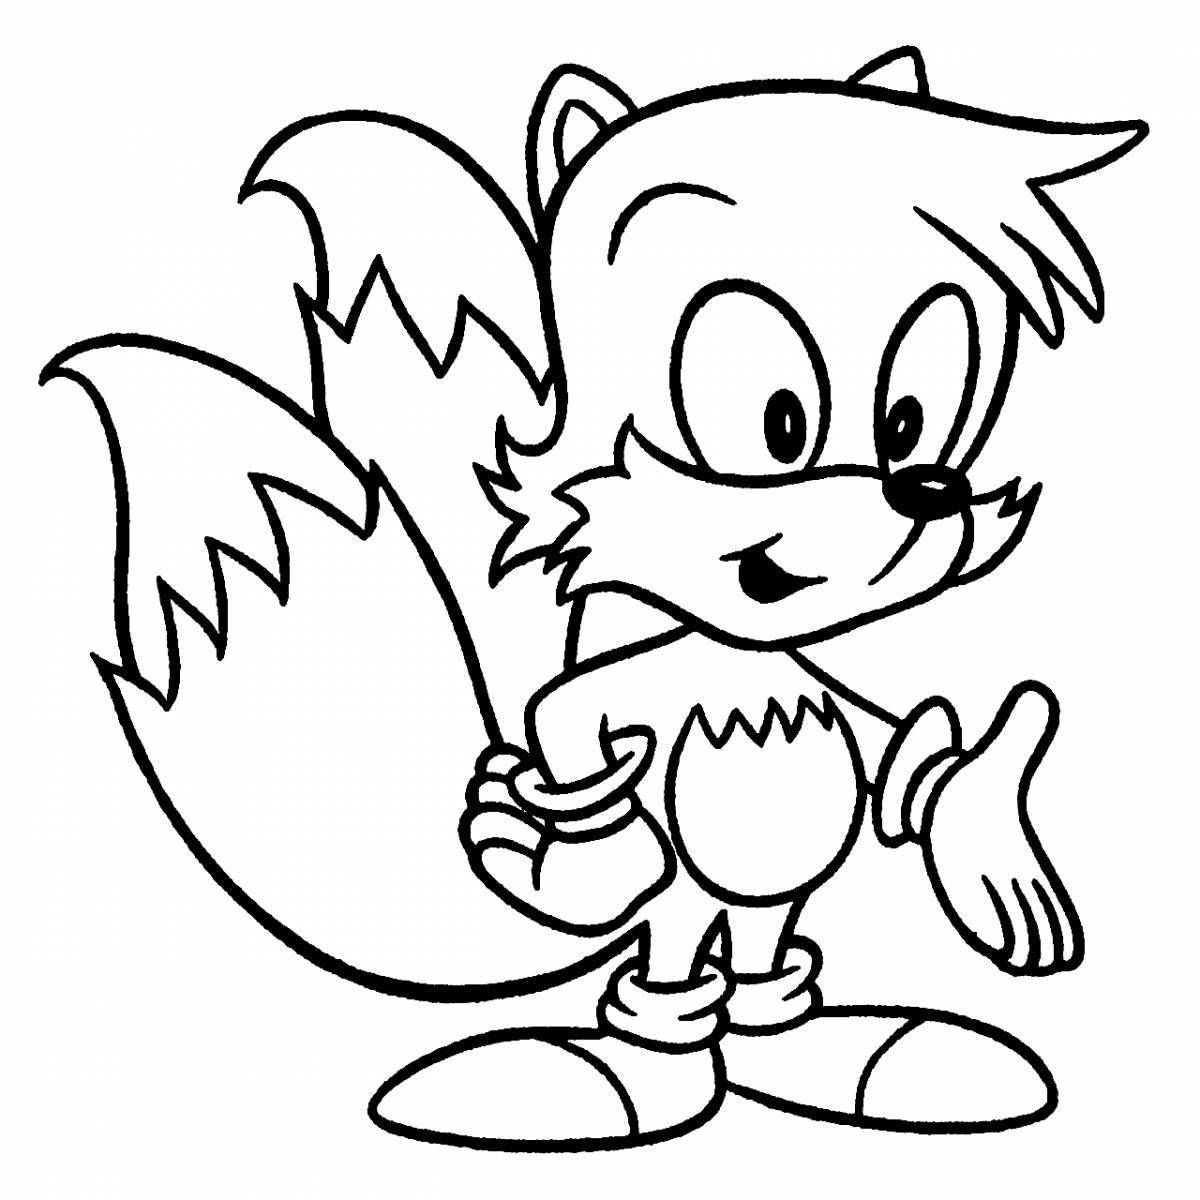 Miles tails prower #1